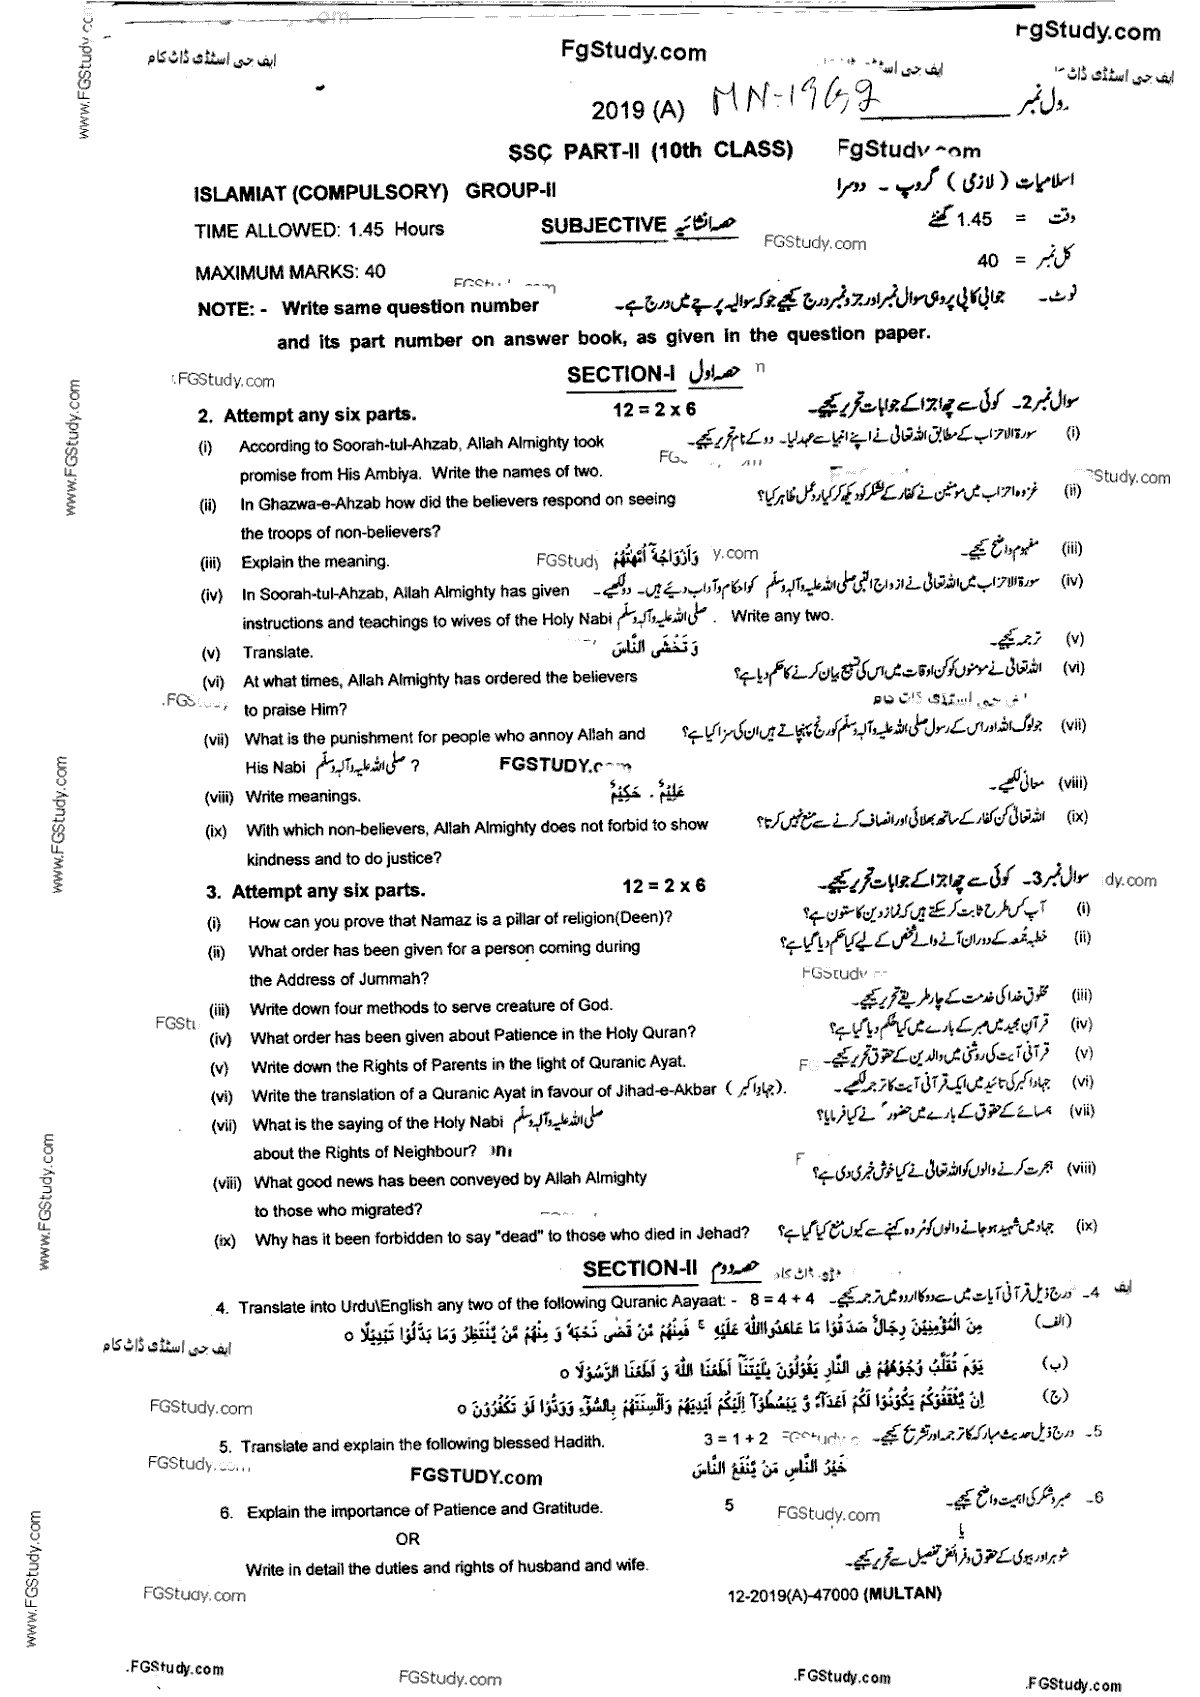 Islamiyat Group 2 Subjective 10th Class Past Papers 2019